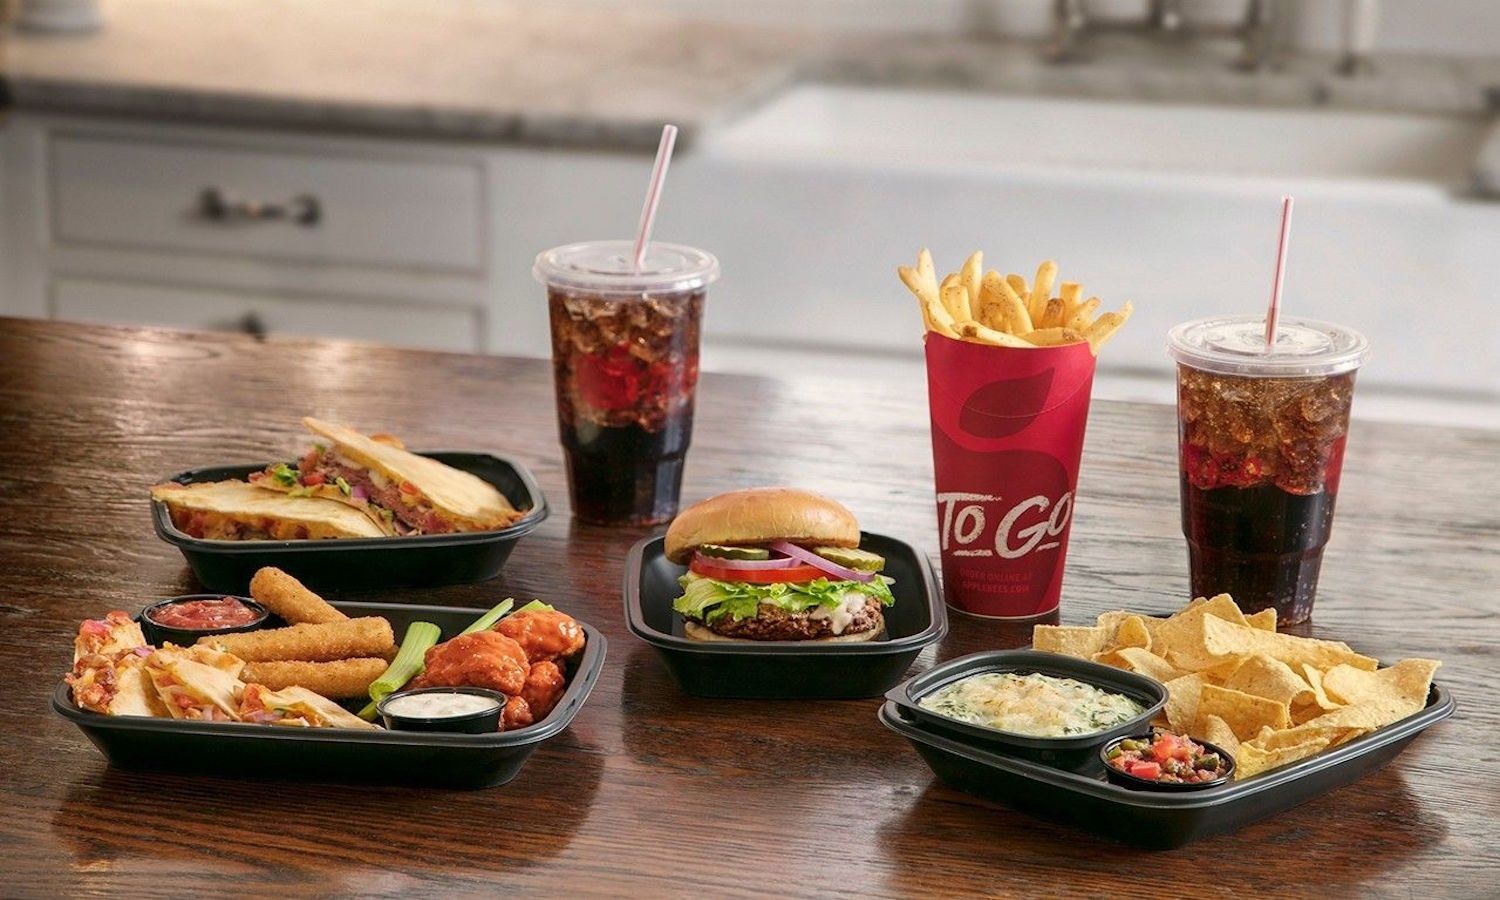 Applebee’s Takeout Near You in New York